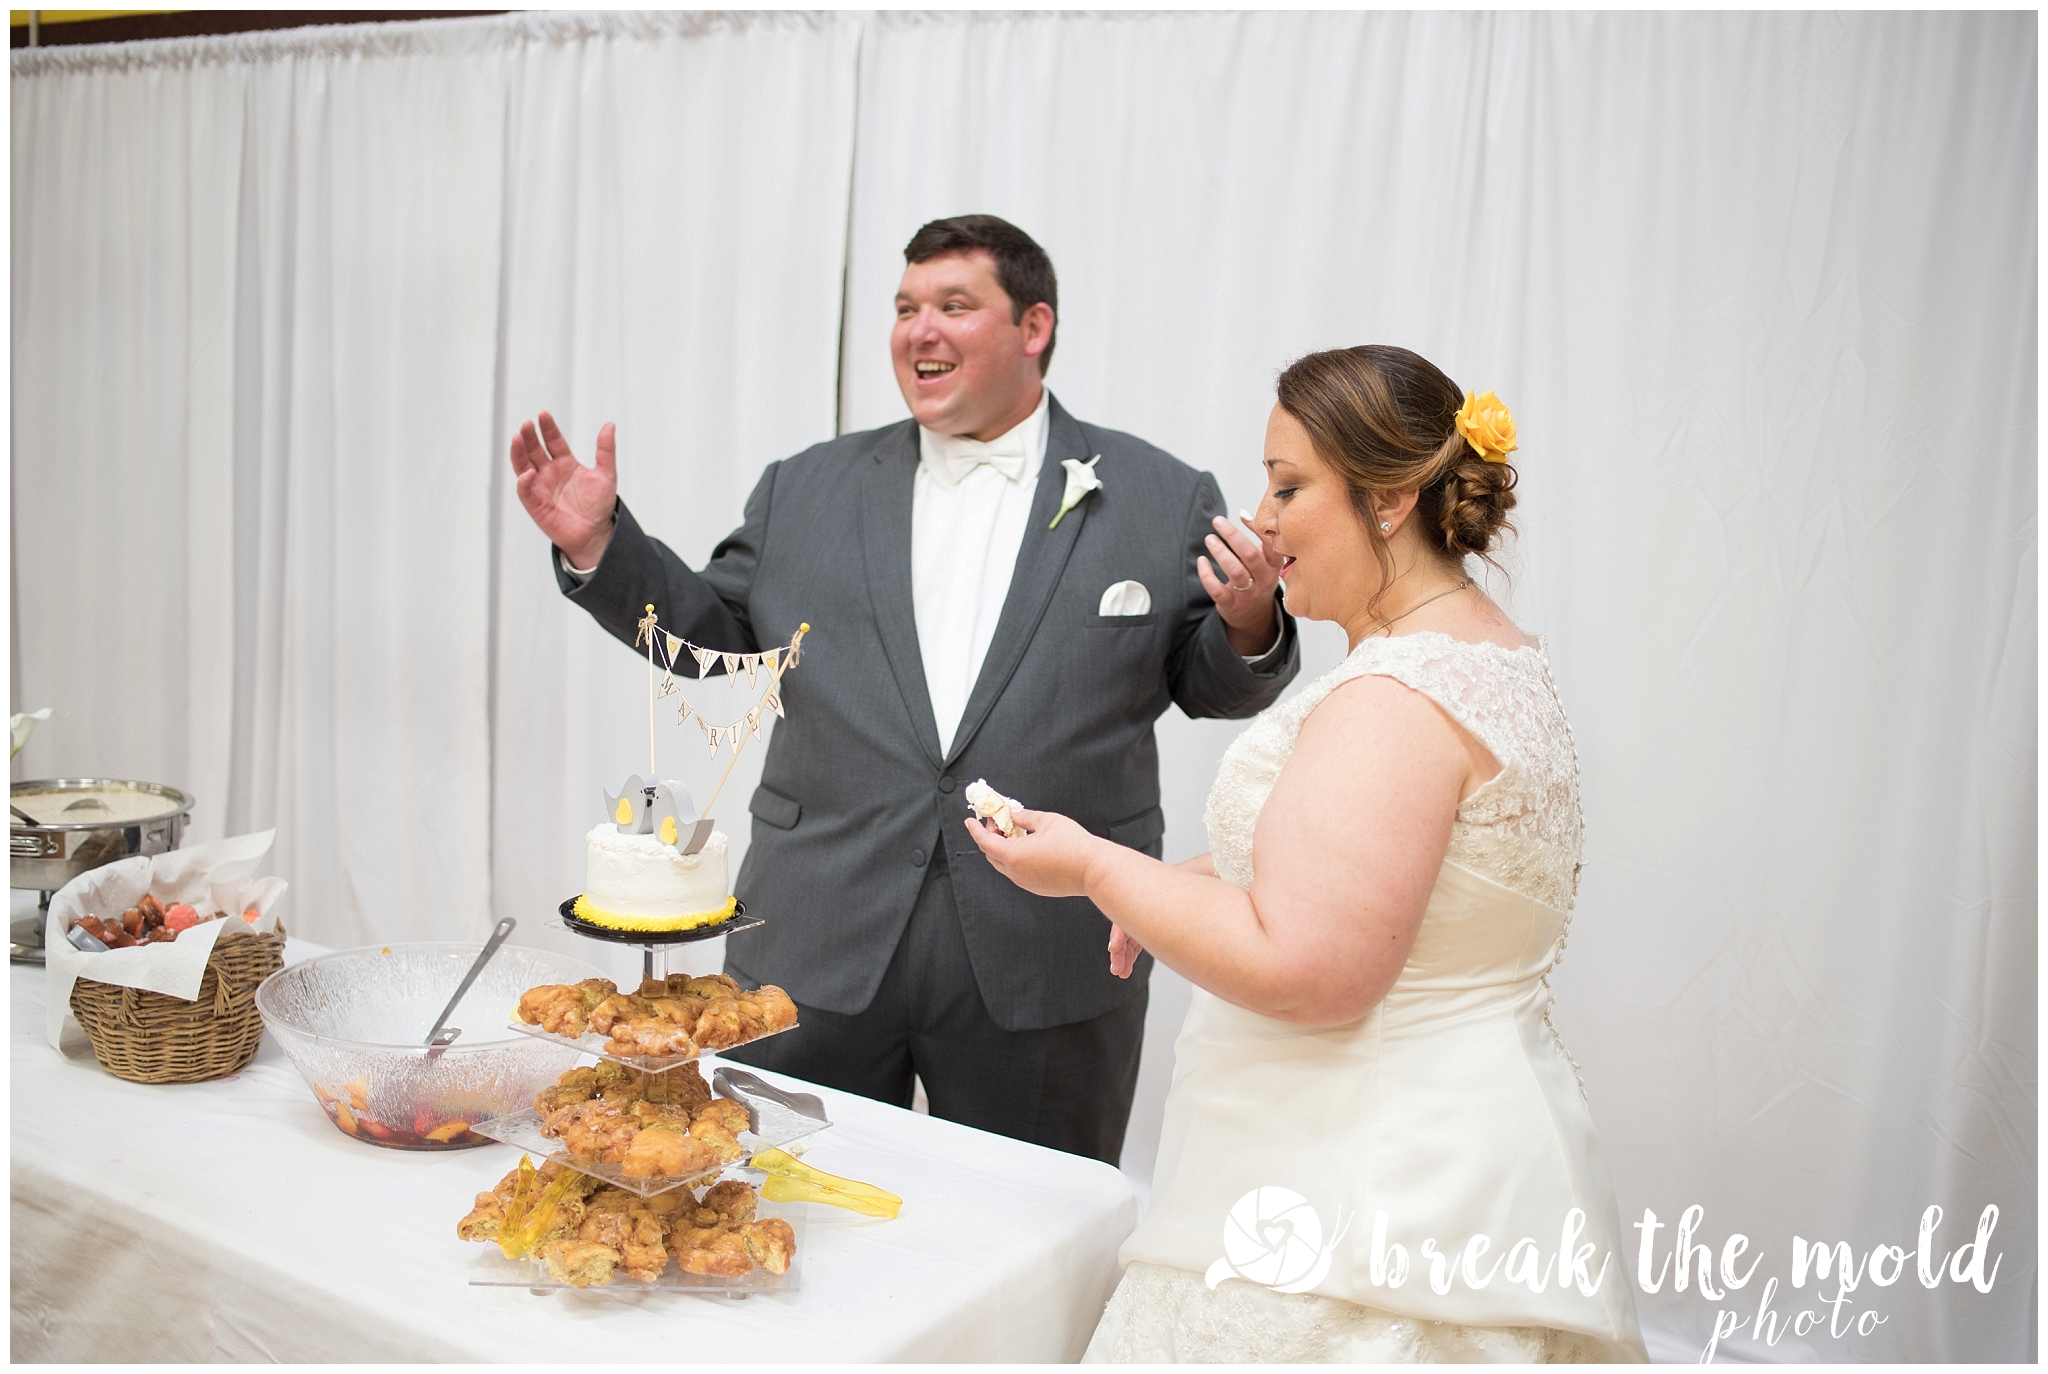 wedding-knoxville-sacred-heart-cathedral-photographer-break-the-mold-photo-feature-affordable_0822.jpg